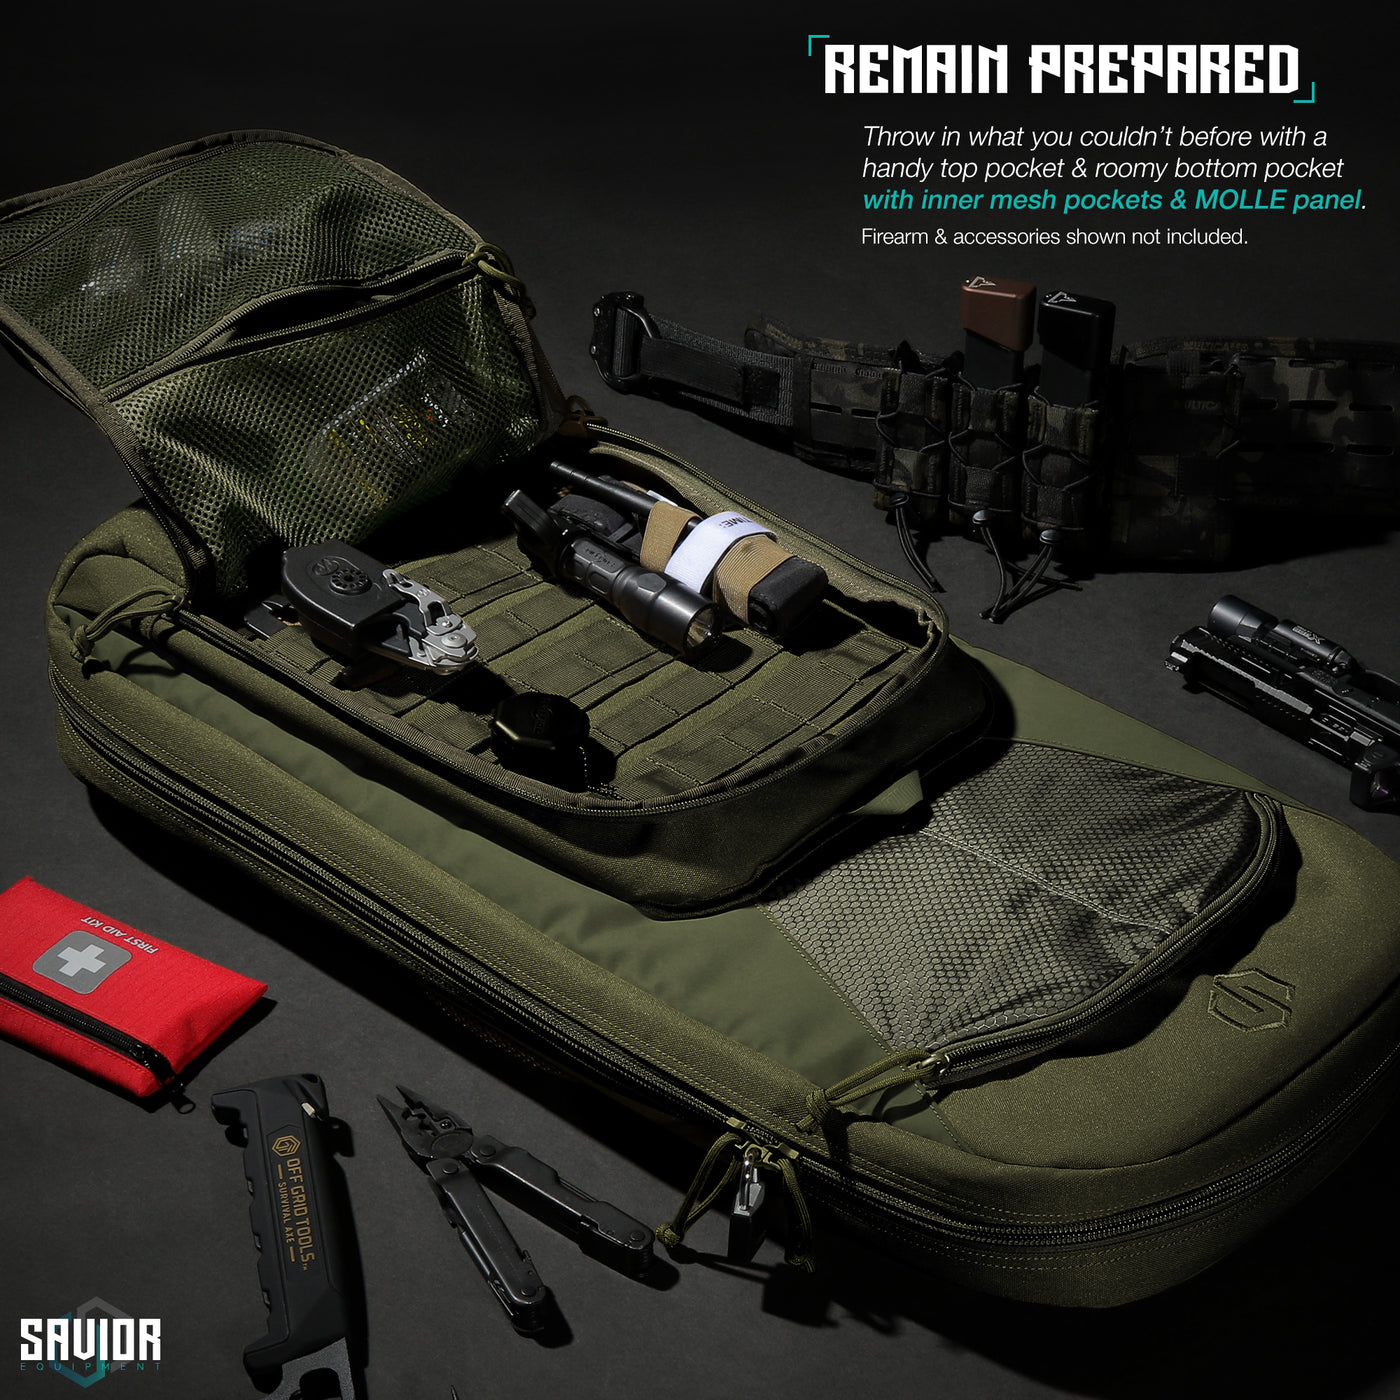 Remain Prepared - Throw in what you couldn't before with a handy top pocket & roomy bottom pocket with inner mesh pockets & molle panel. Firearms & accessories shown not included.